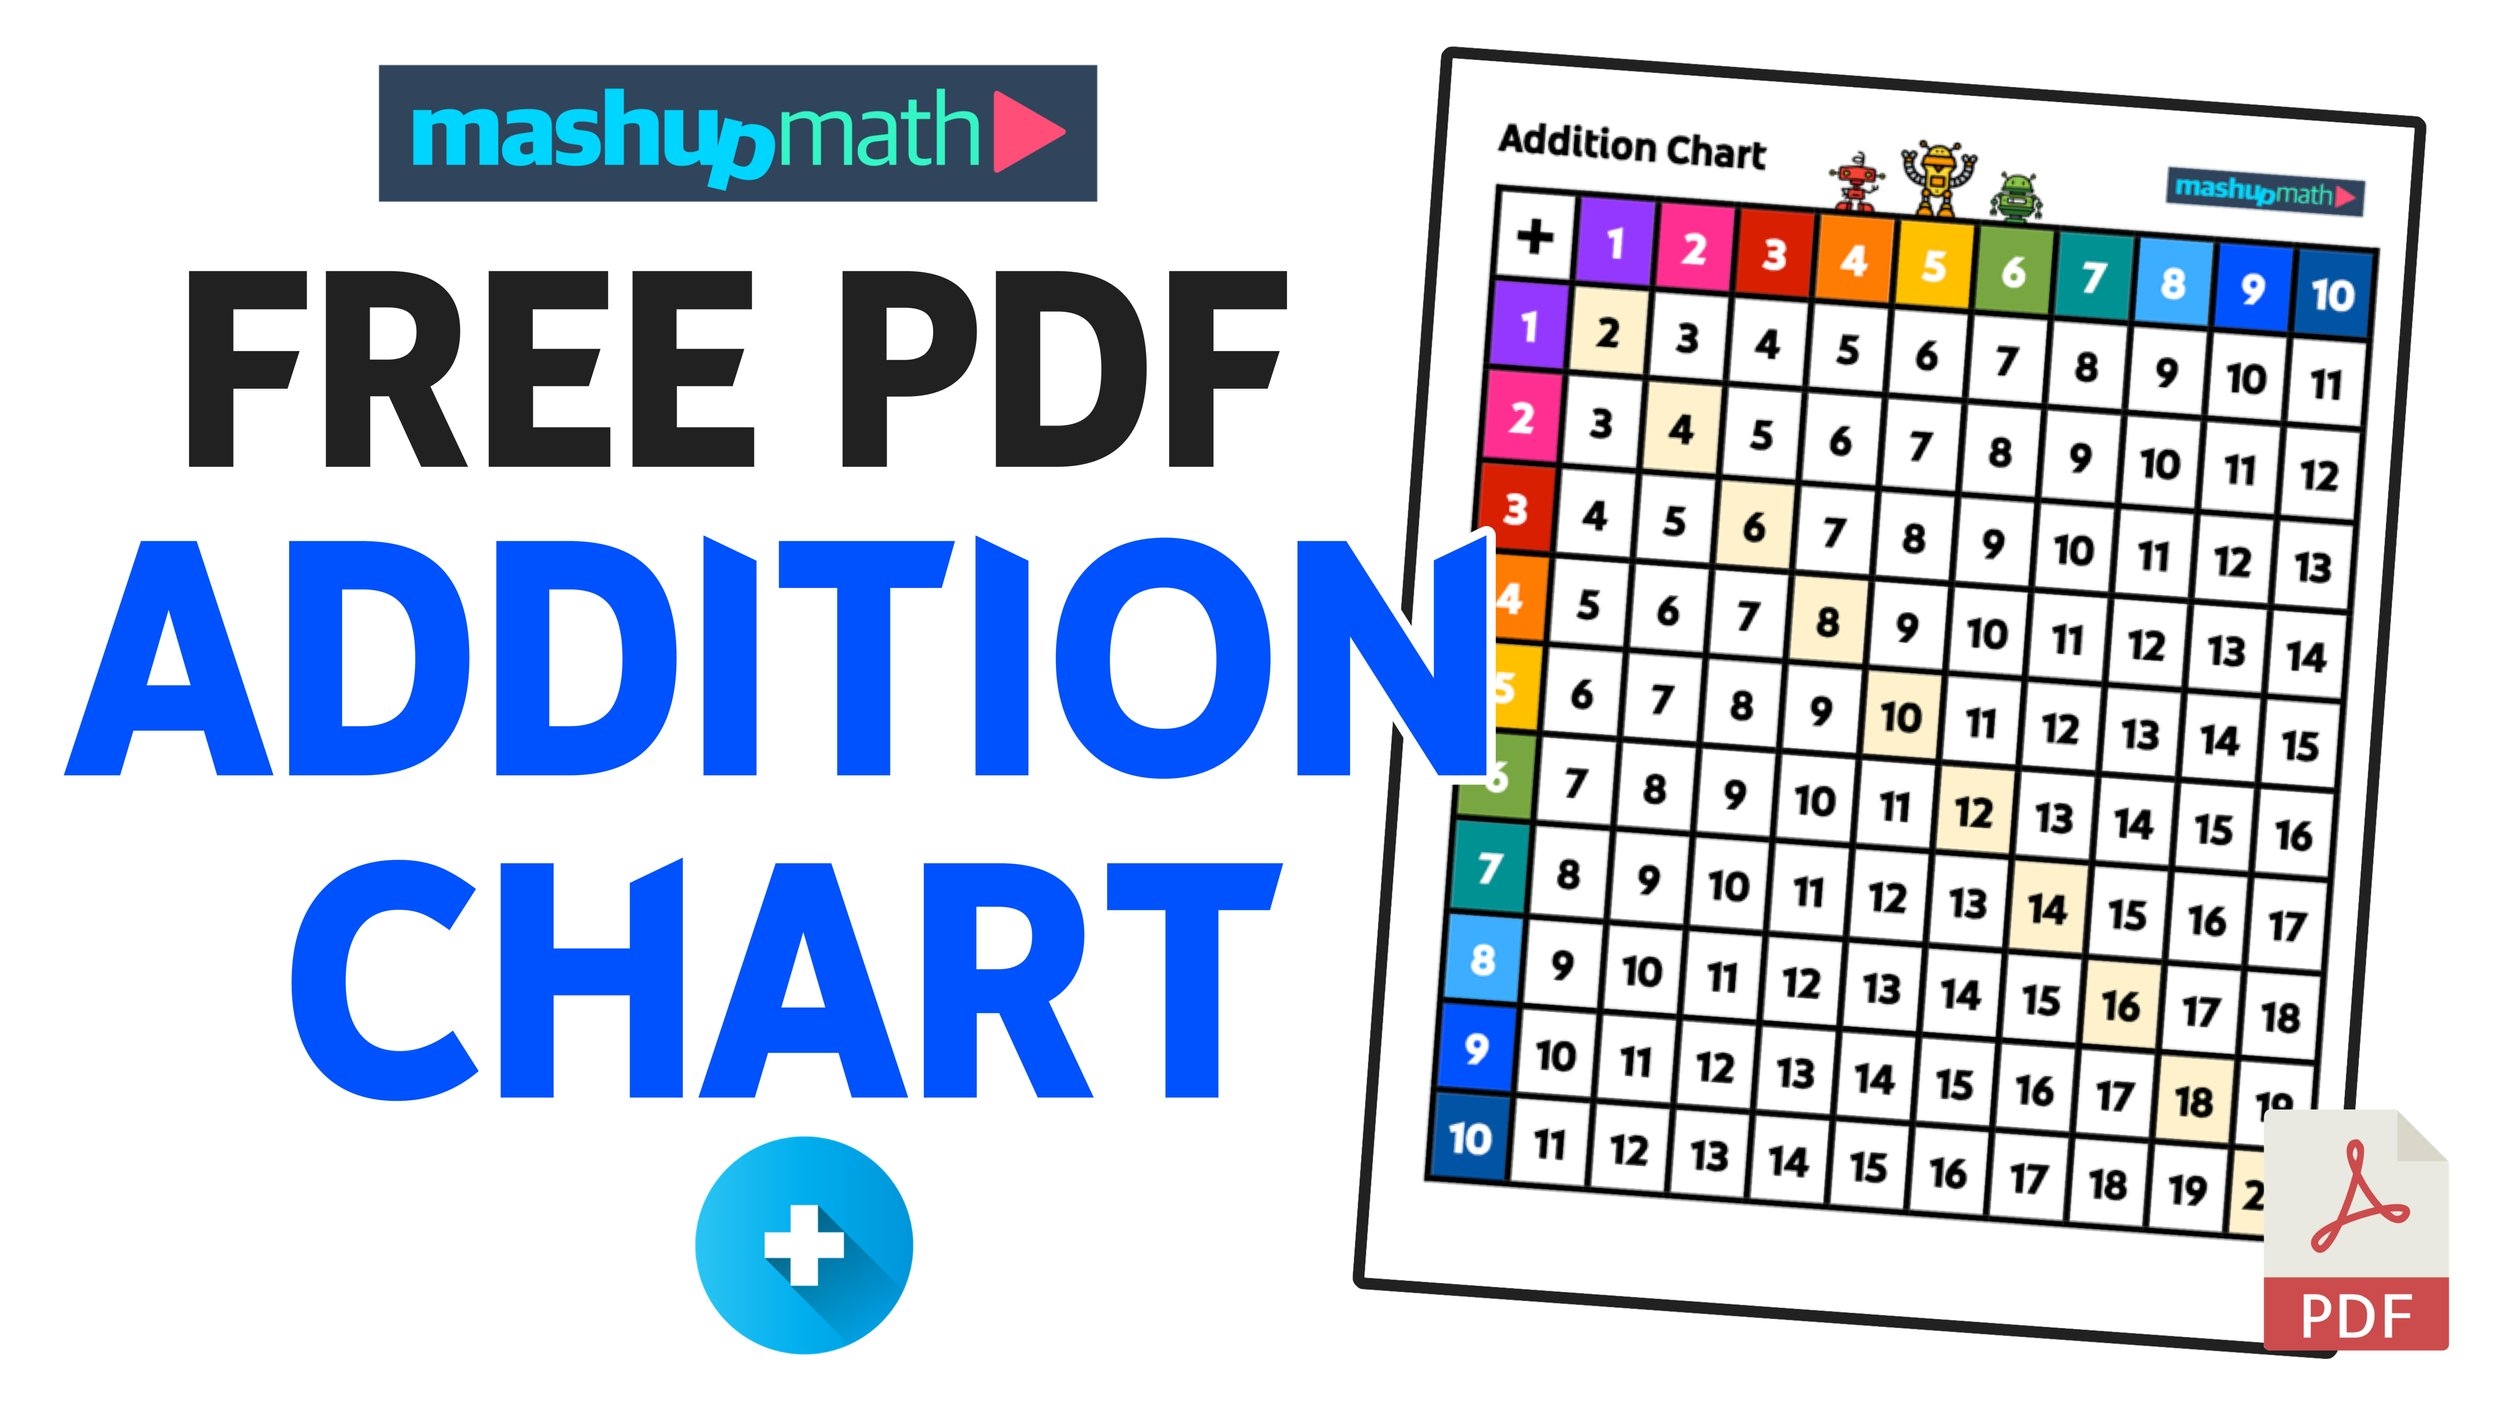 Free Addition Chart For Students Printable PDF Mashup Math - Free Printable Addition Chart